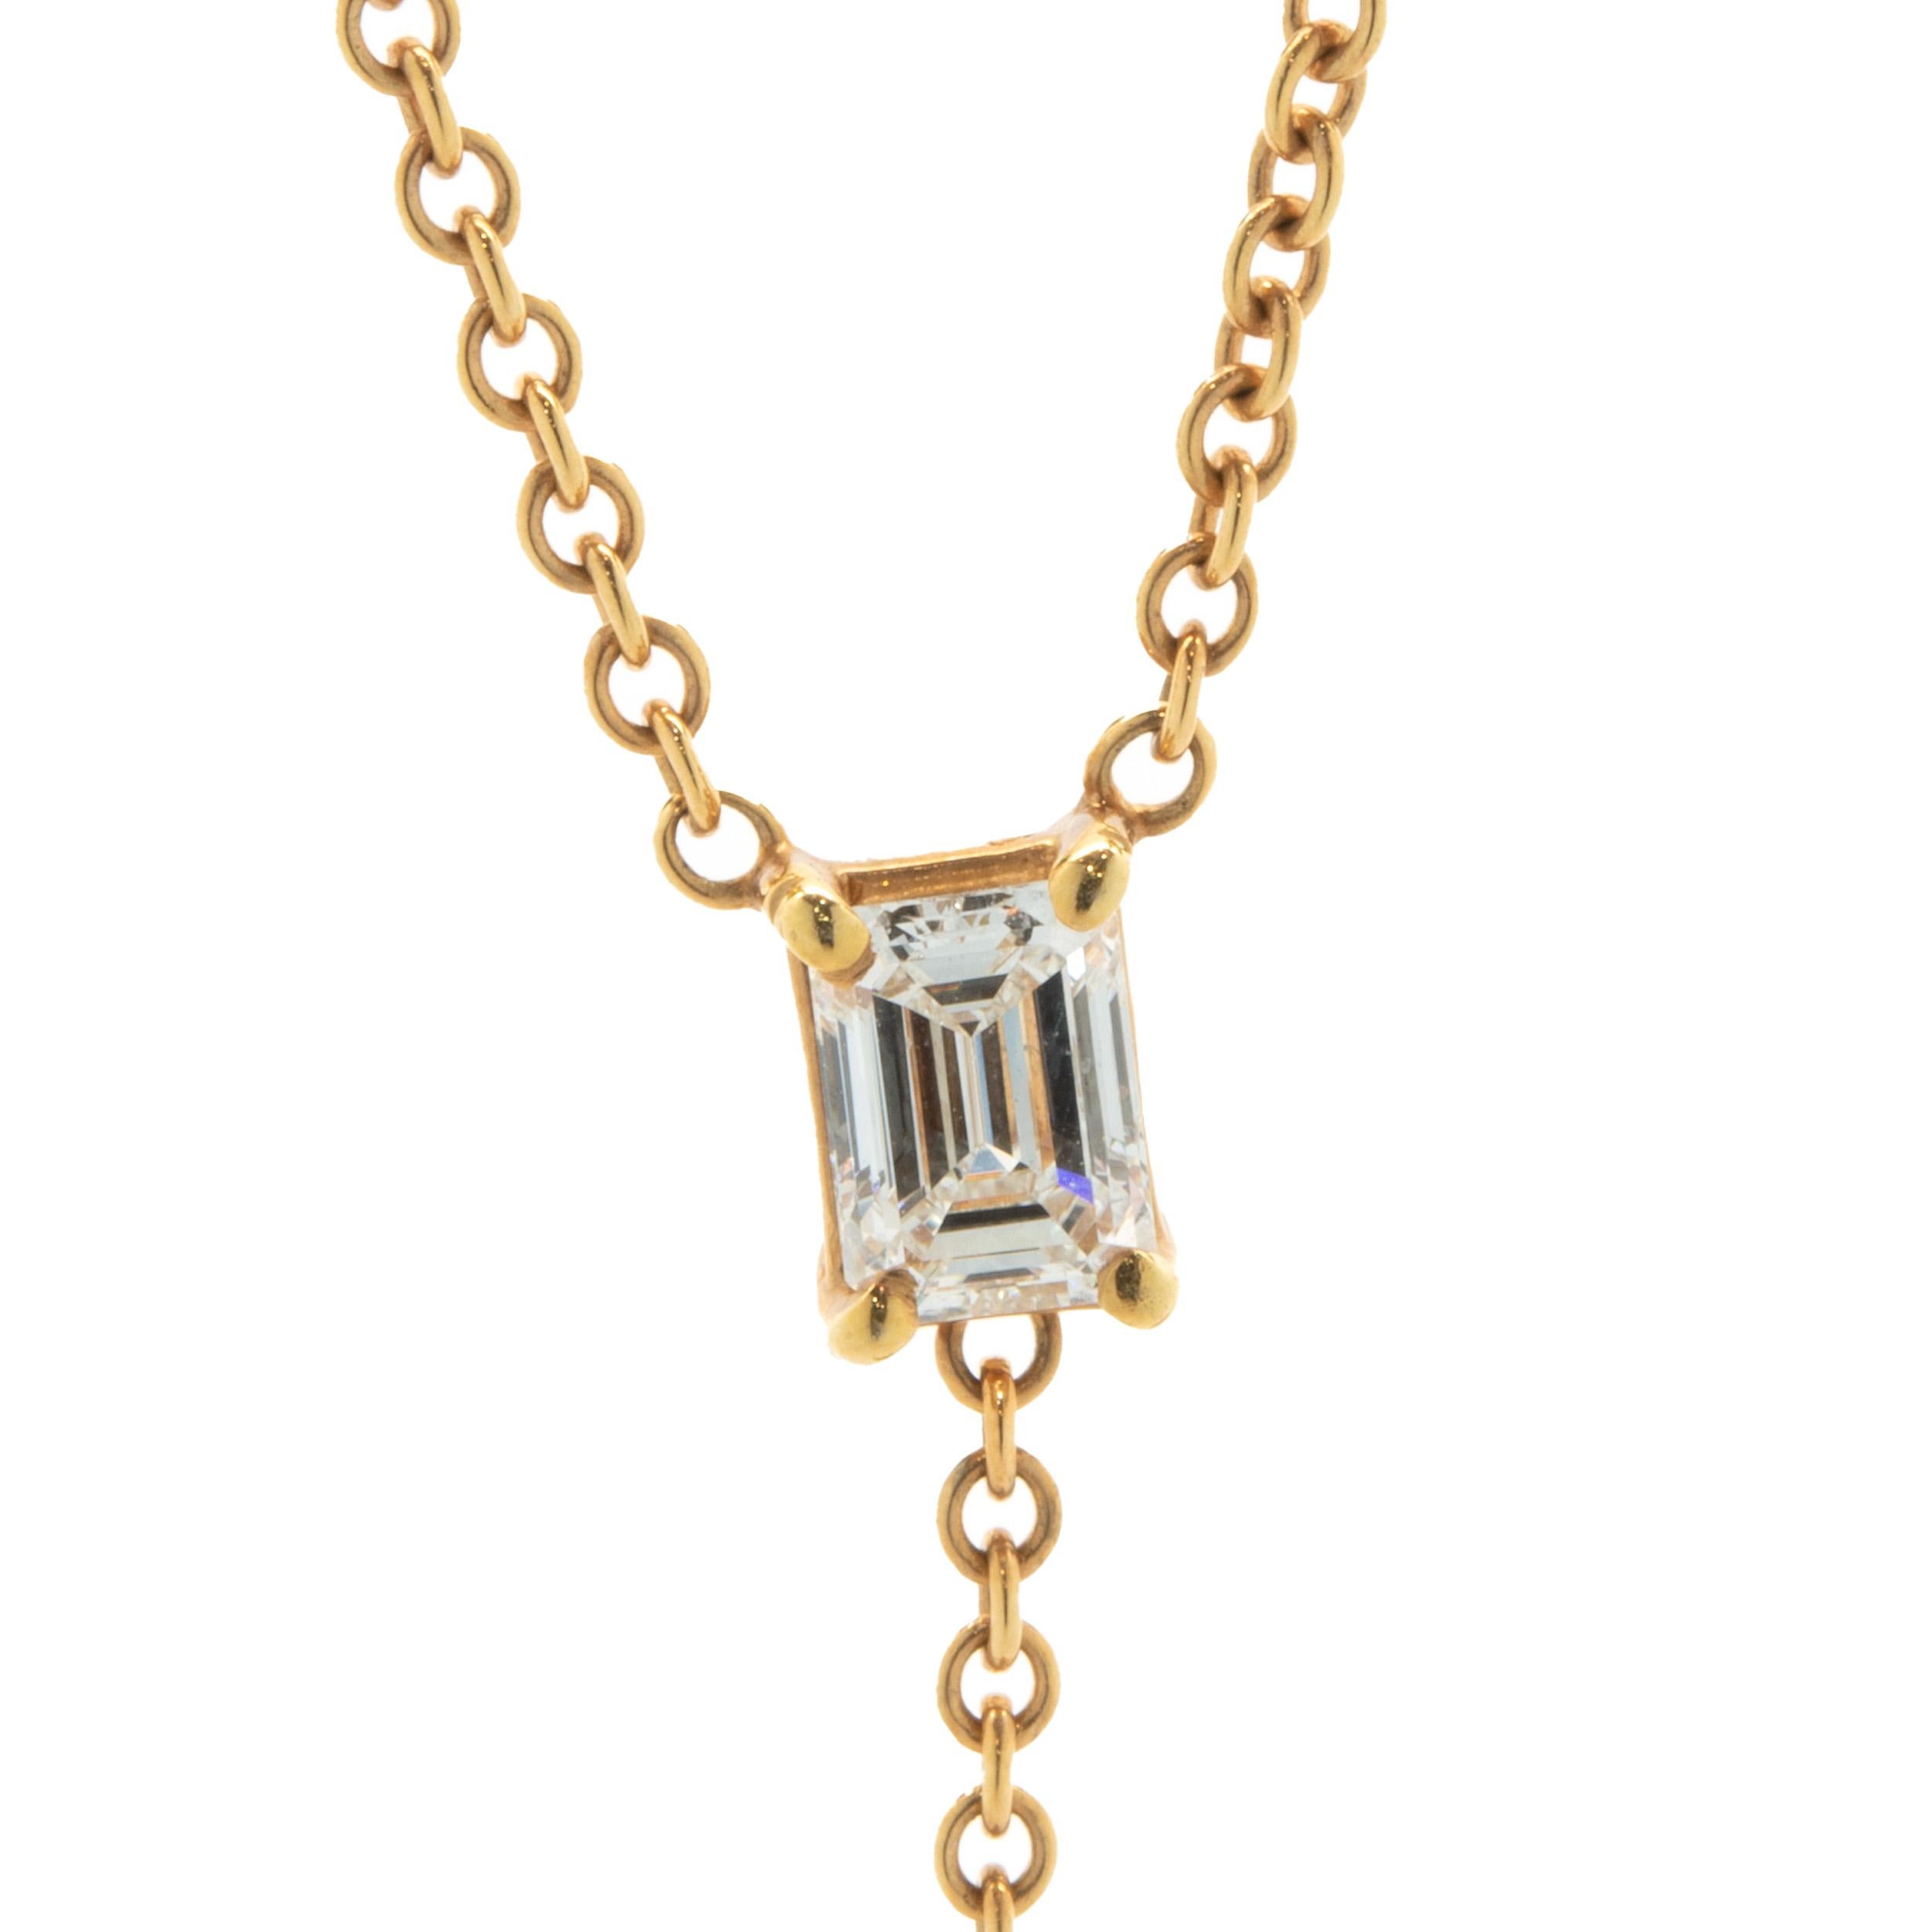 Designer: custom design
Material: 18K rose gold
Diamond: 1 emerald cut = 0.41ct
Color: G
Clarity: SI1
Diamond: 1 marquise cut = 0.42cttw
Color: H
Clarity: SI1
Dimensions: necklace measures 18-inches in length 
Weight: 4.34 grams
